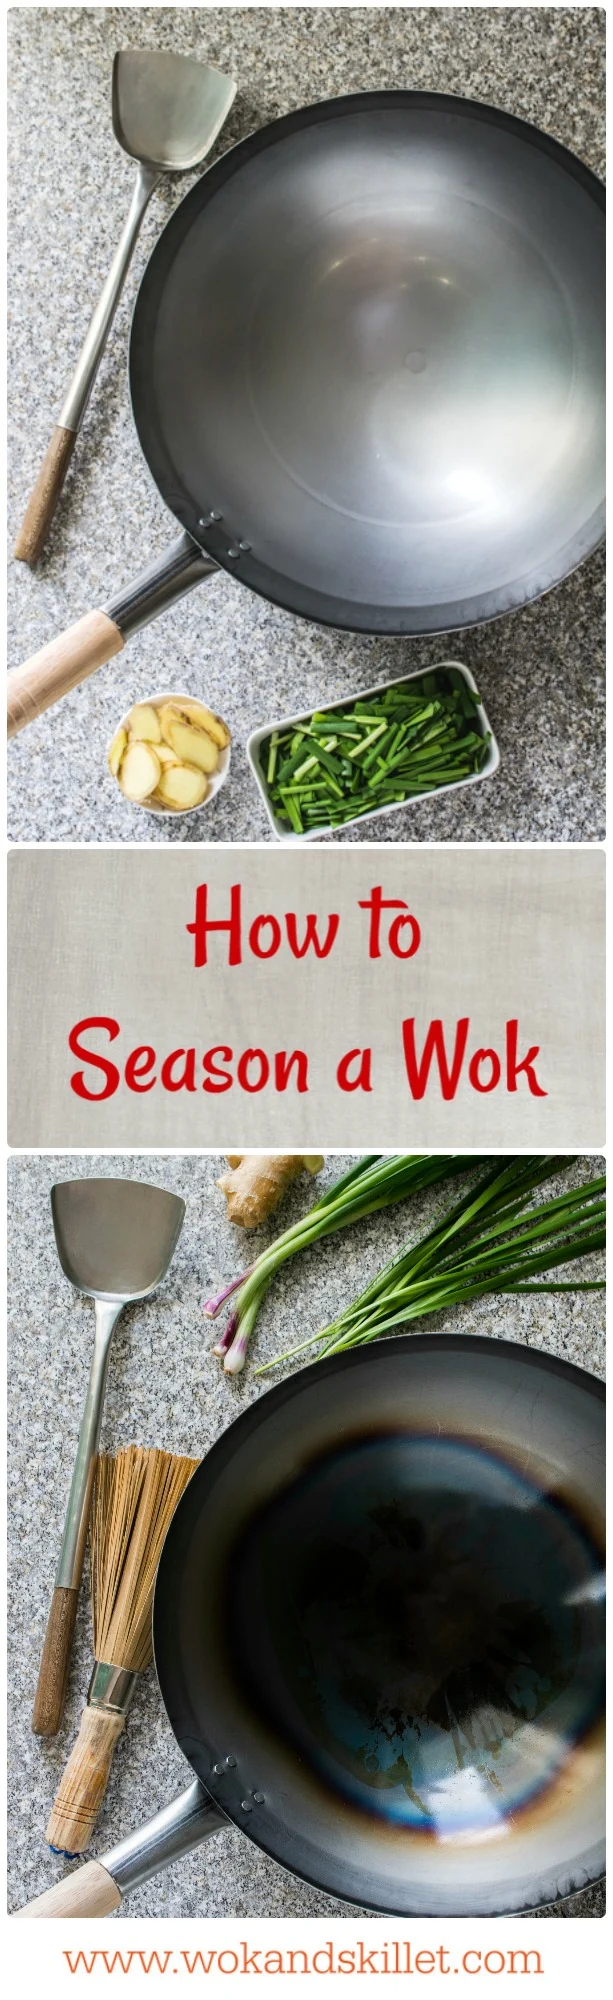 How to season a wok ((how to make your traditional wok non-stick) 